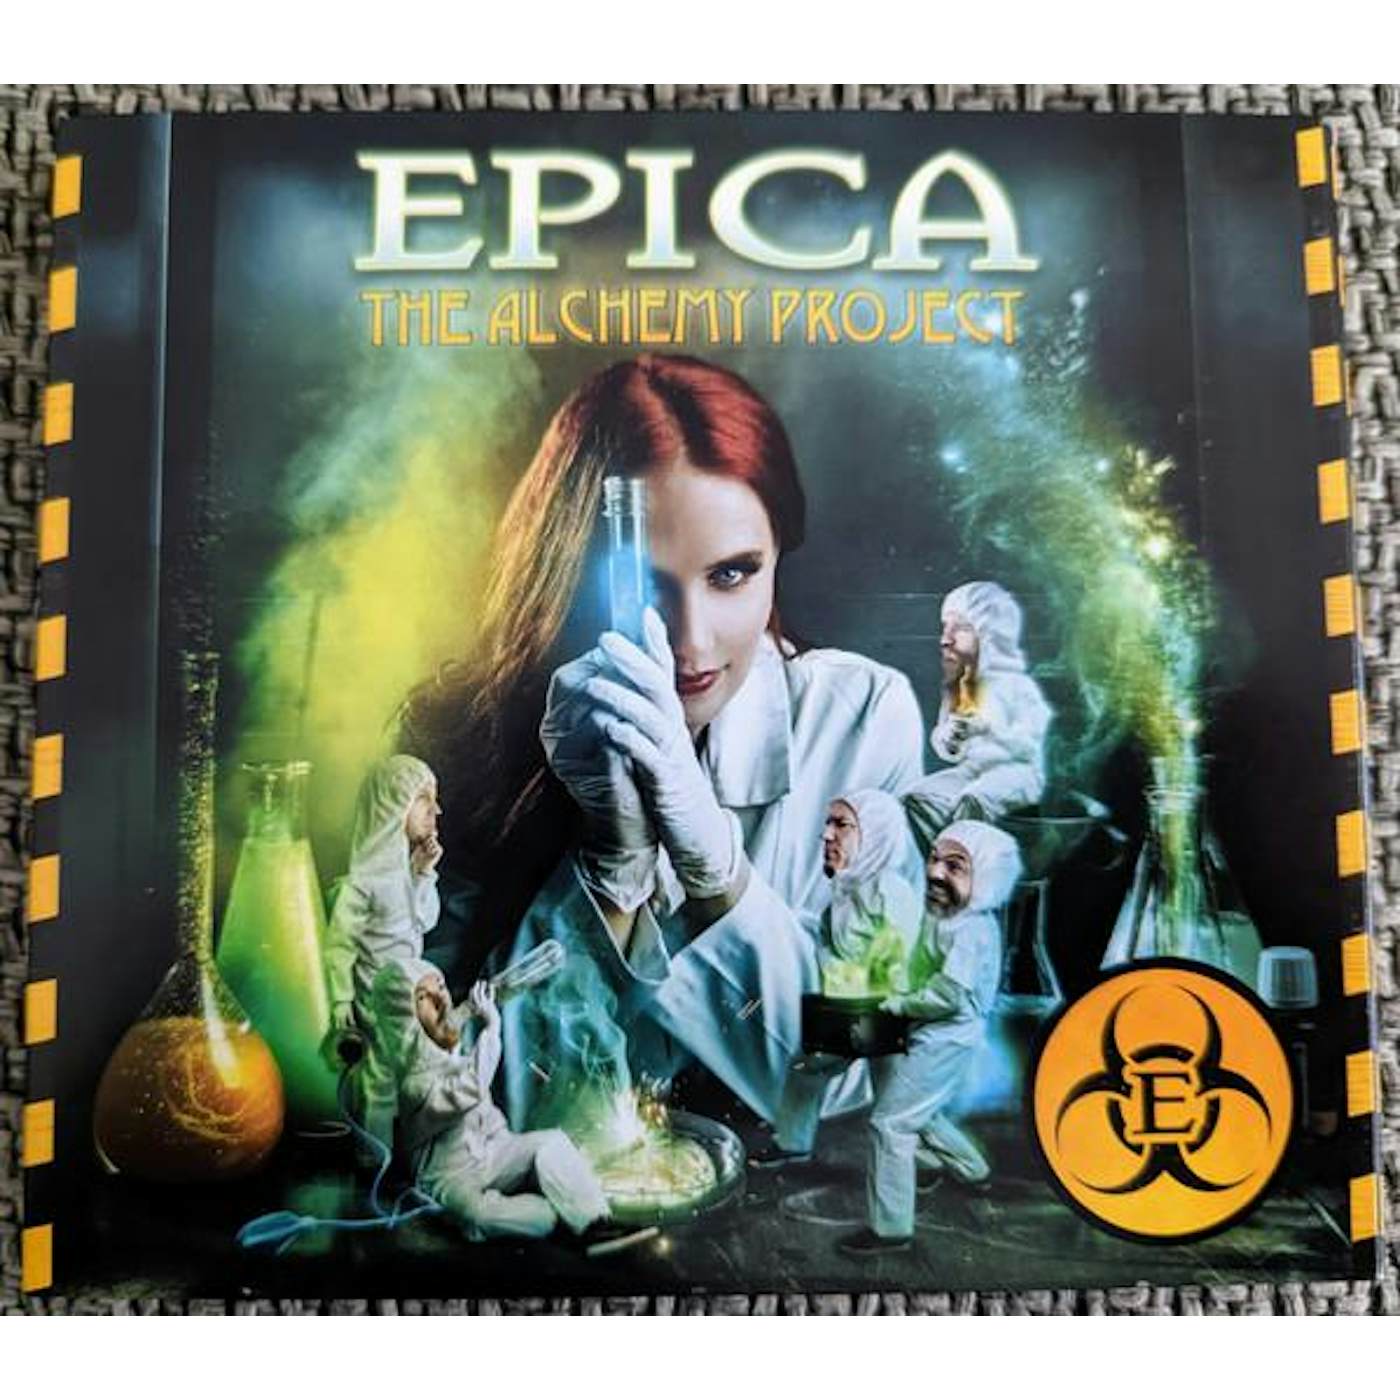 Epica ALCHEMY PROJECT CD